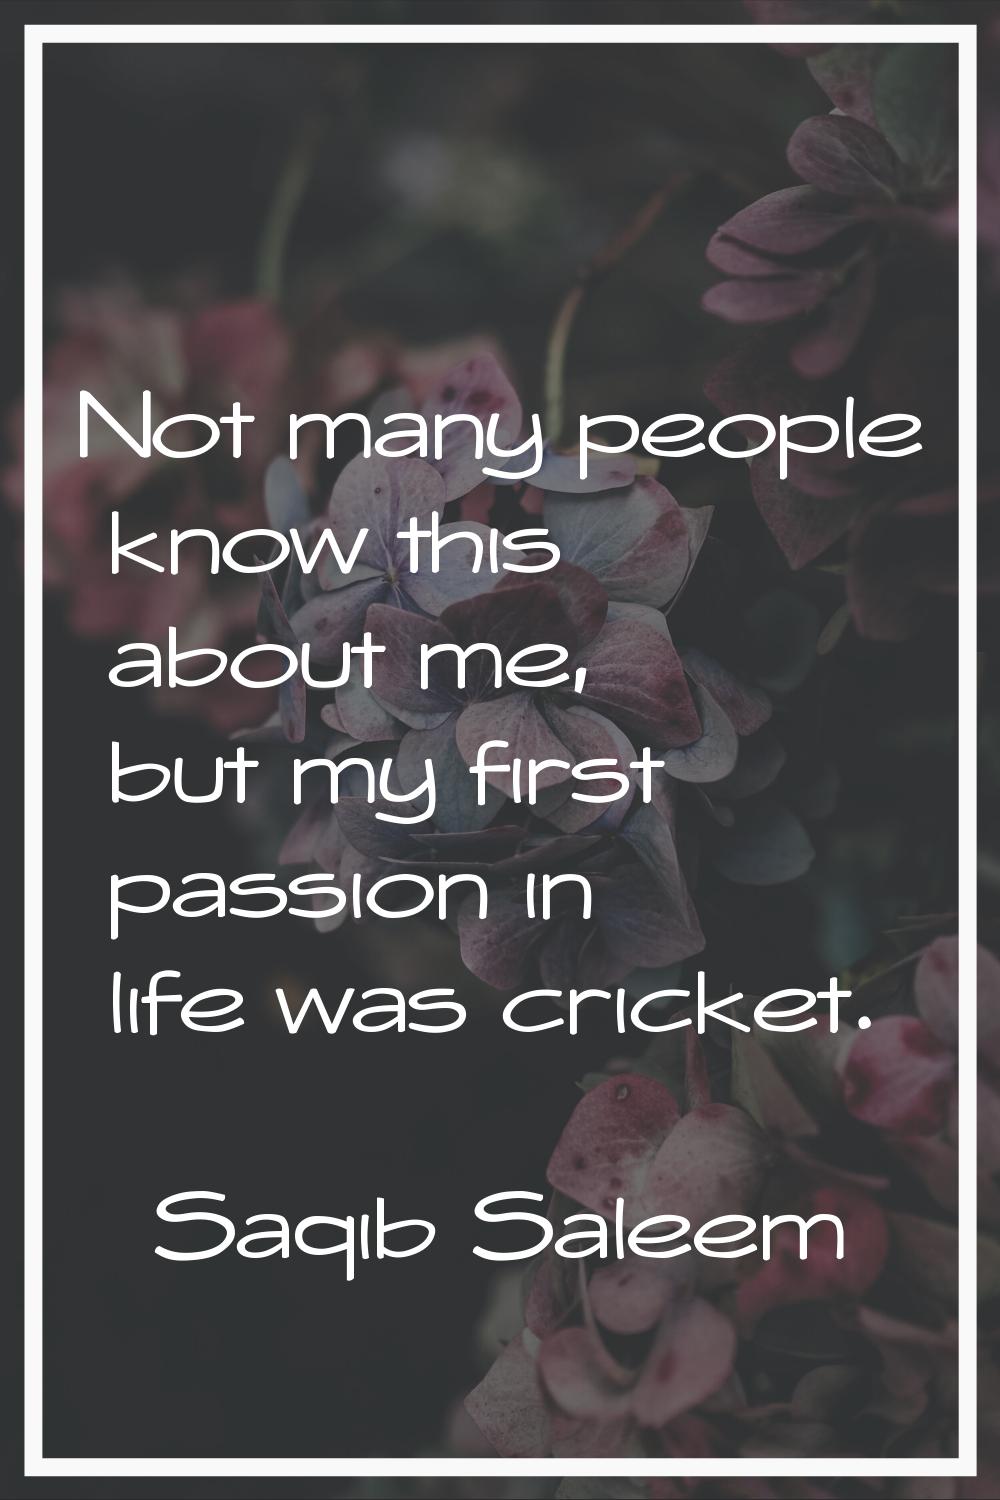 Not many people know this about me, but my first passion in life was cricket.